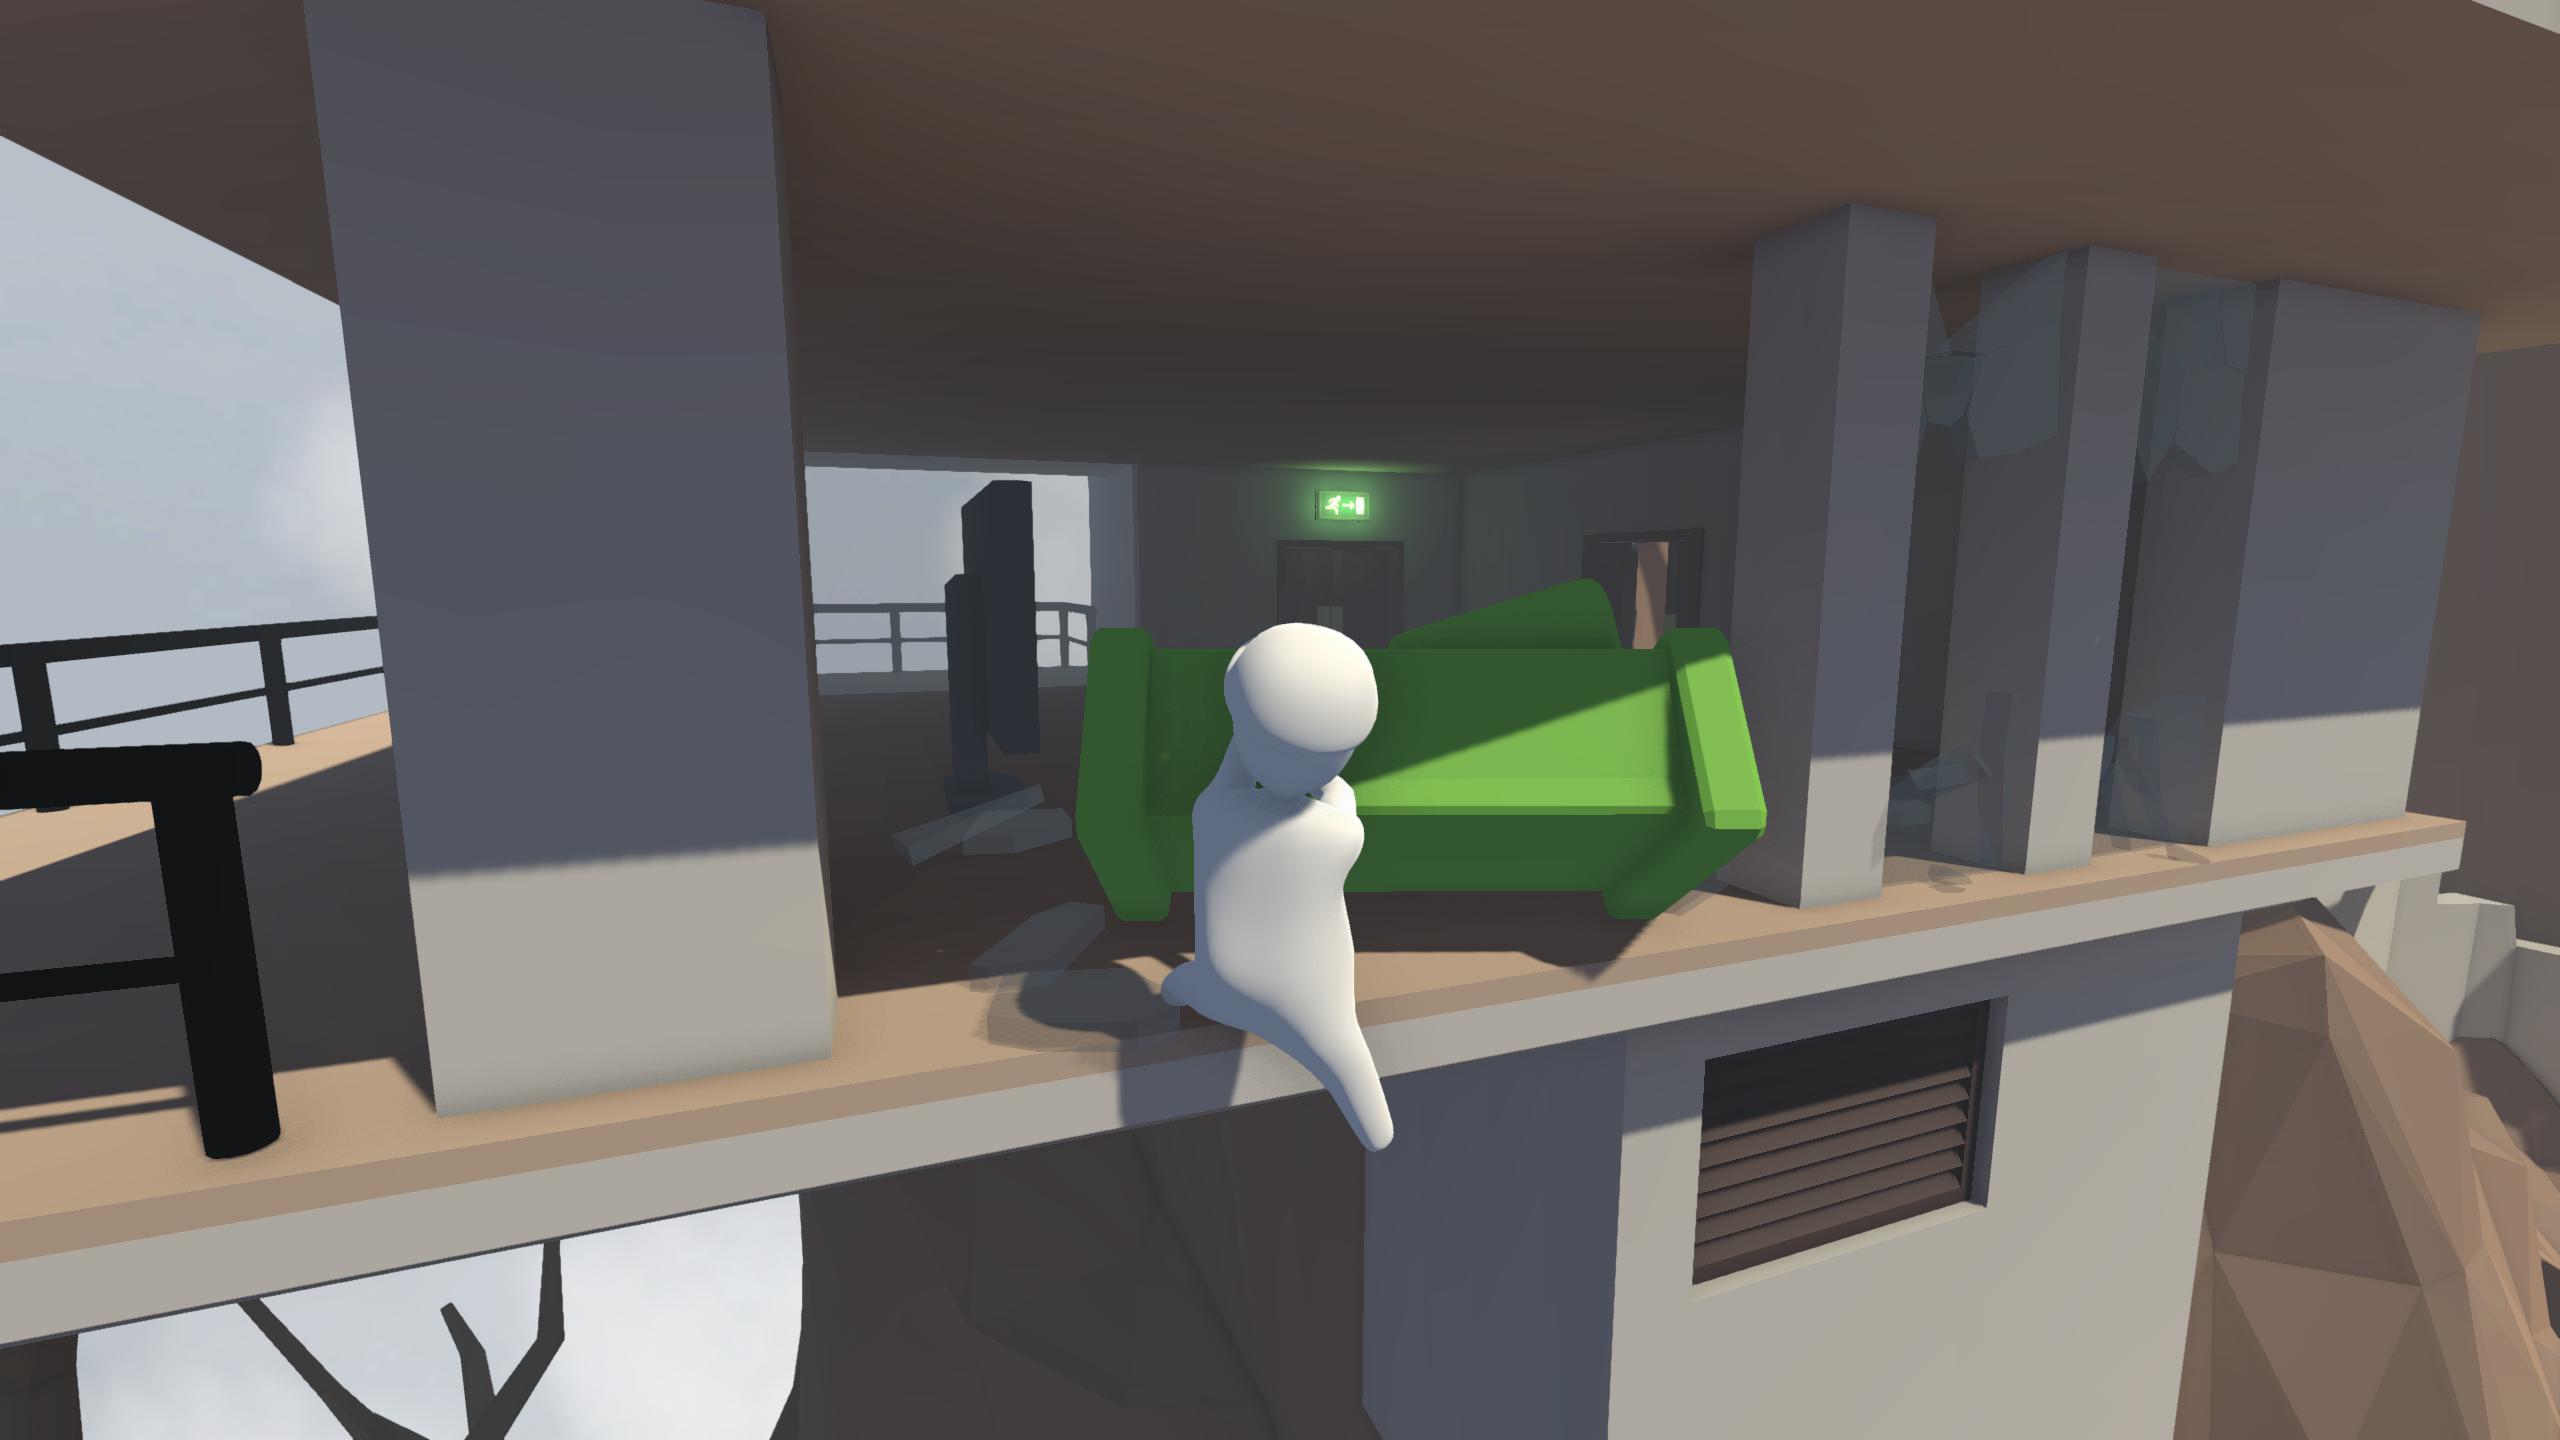 Human: Fall Flat Picture